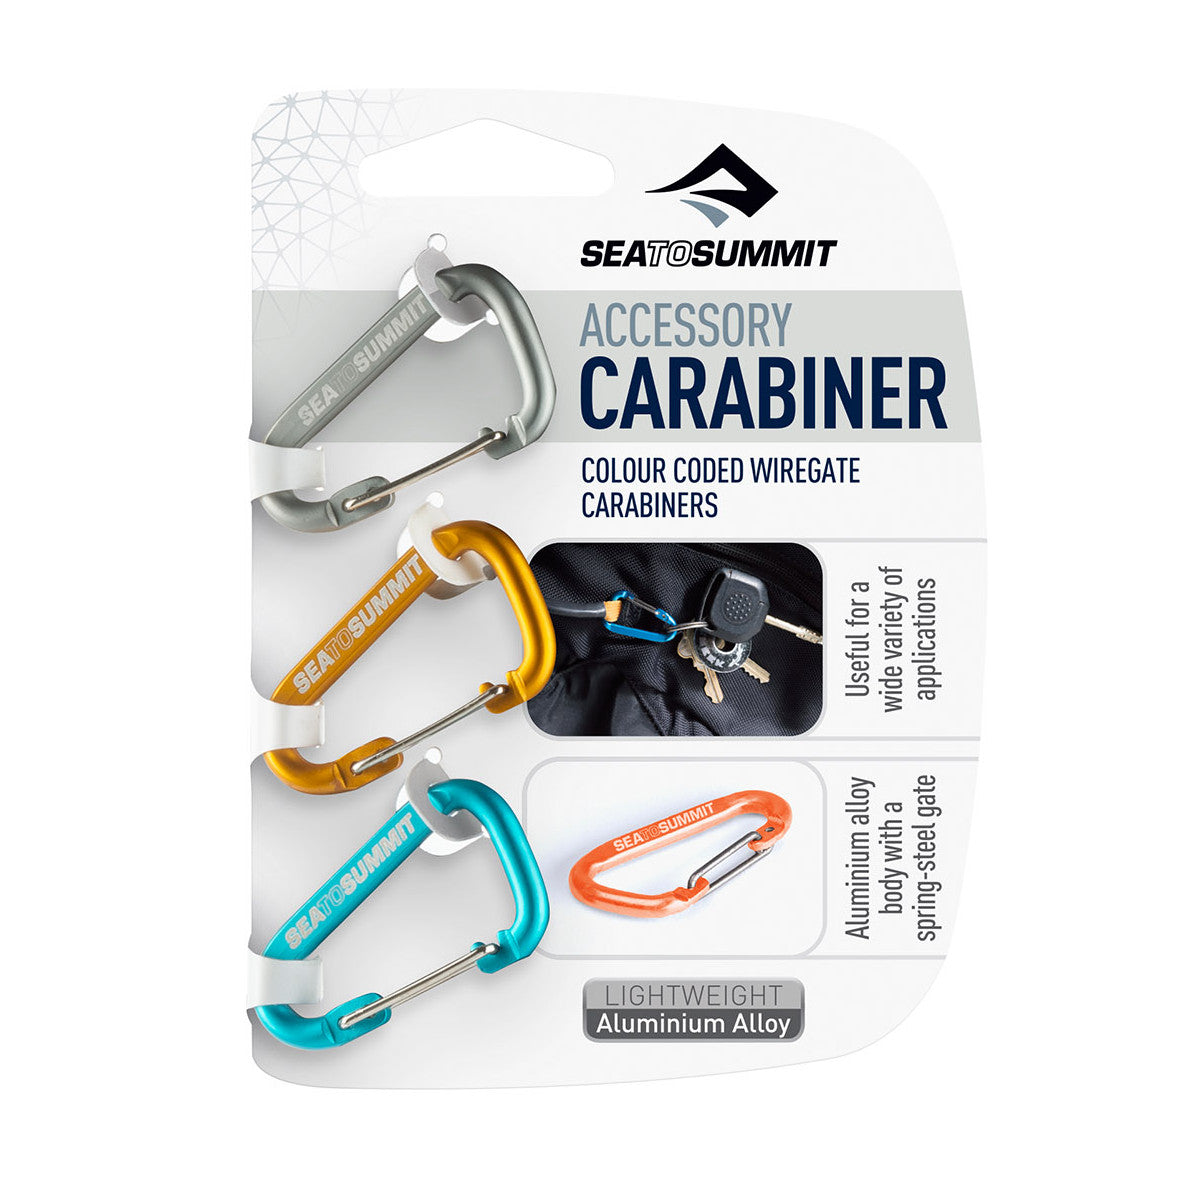 The Sea to Summit Accessory Carabiners are perfect for keeping keys together, attaching things to your pack, hanging a lantern in your tent, and many other uses. 